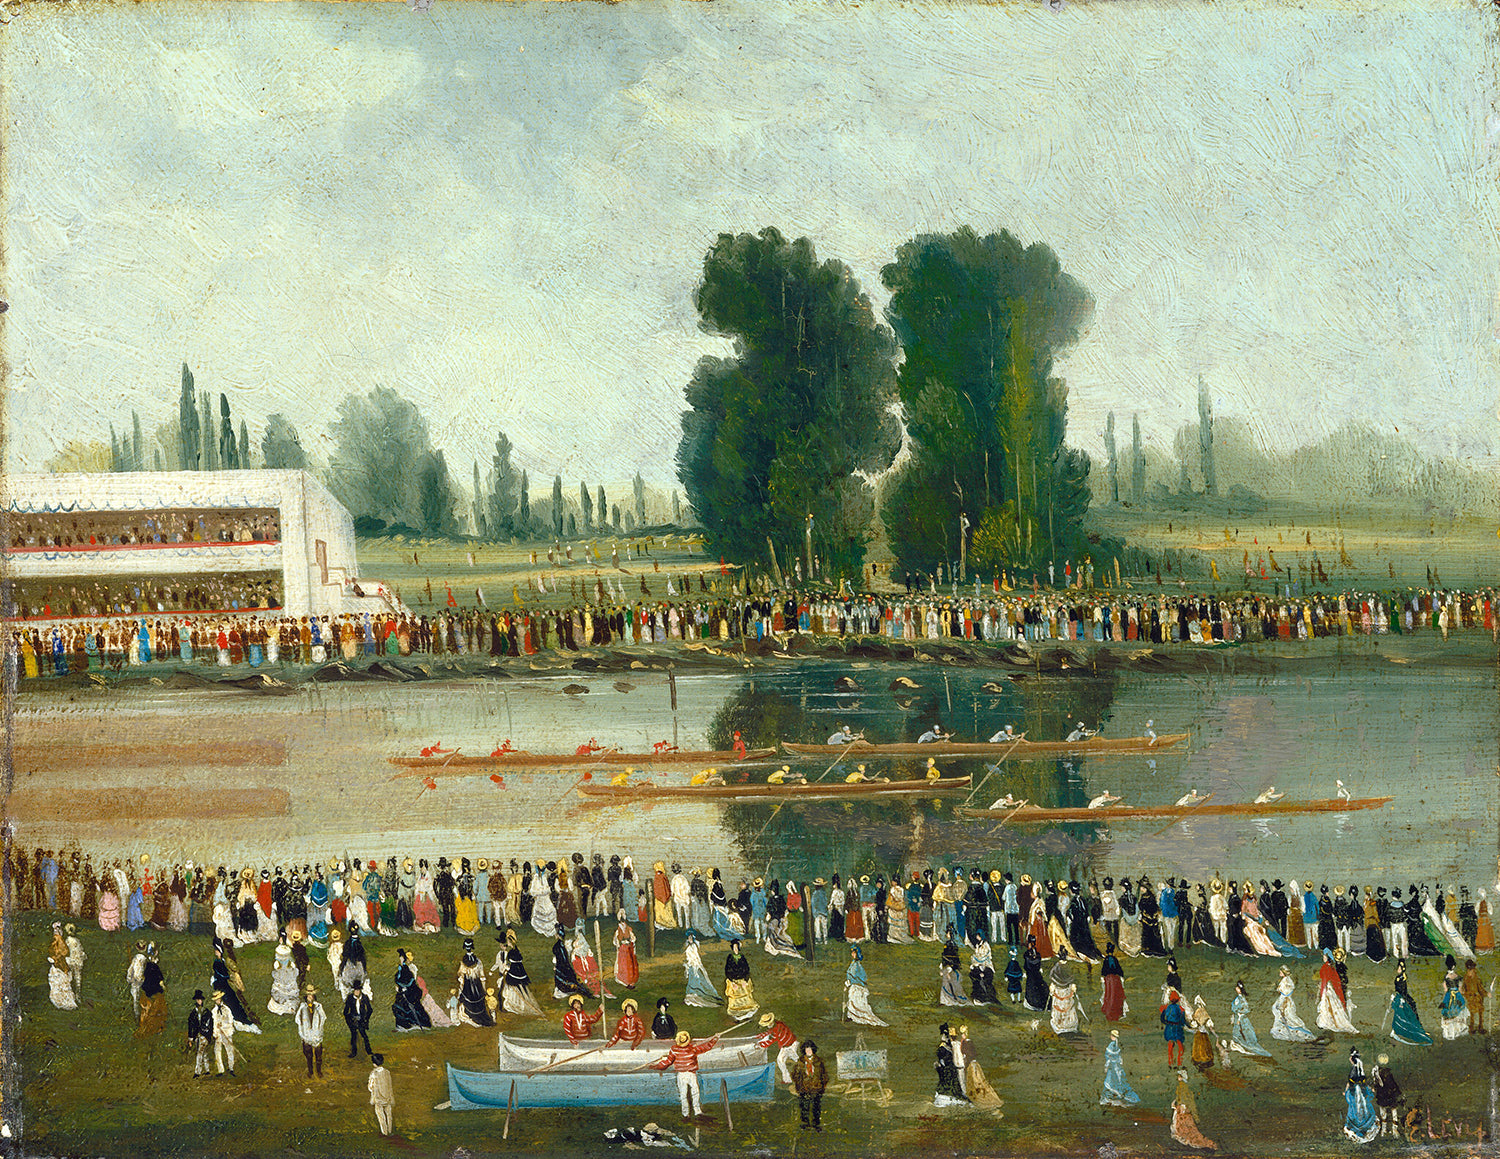 Rowing Scene: Crowds Watching from the River Banks by E. Levy Art Print